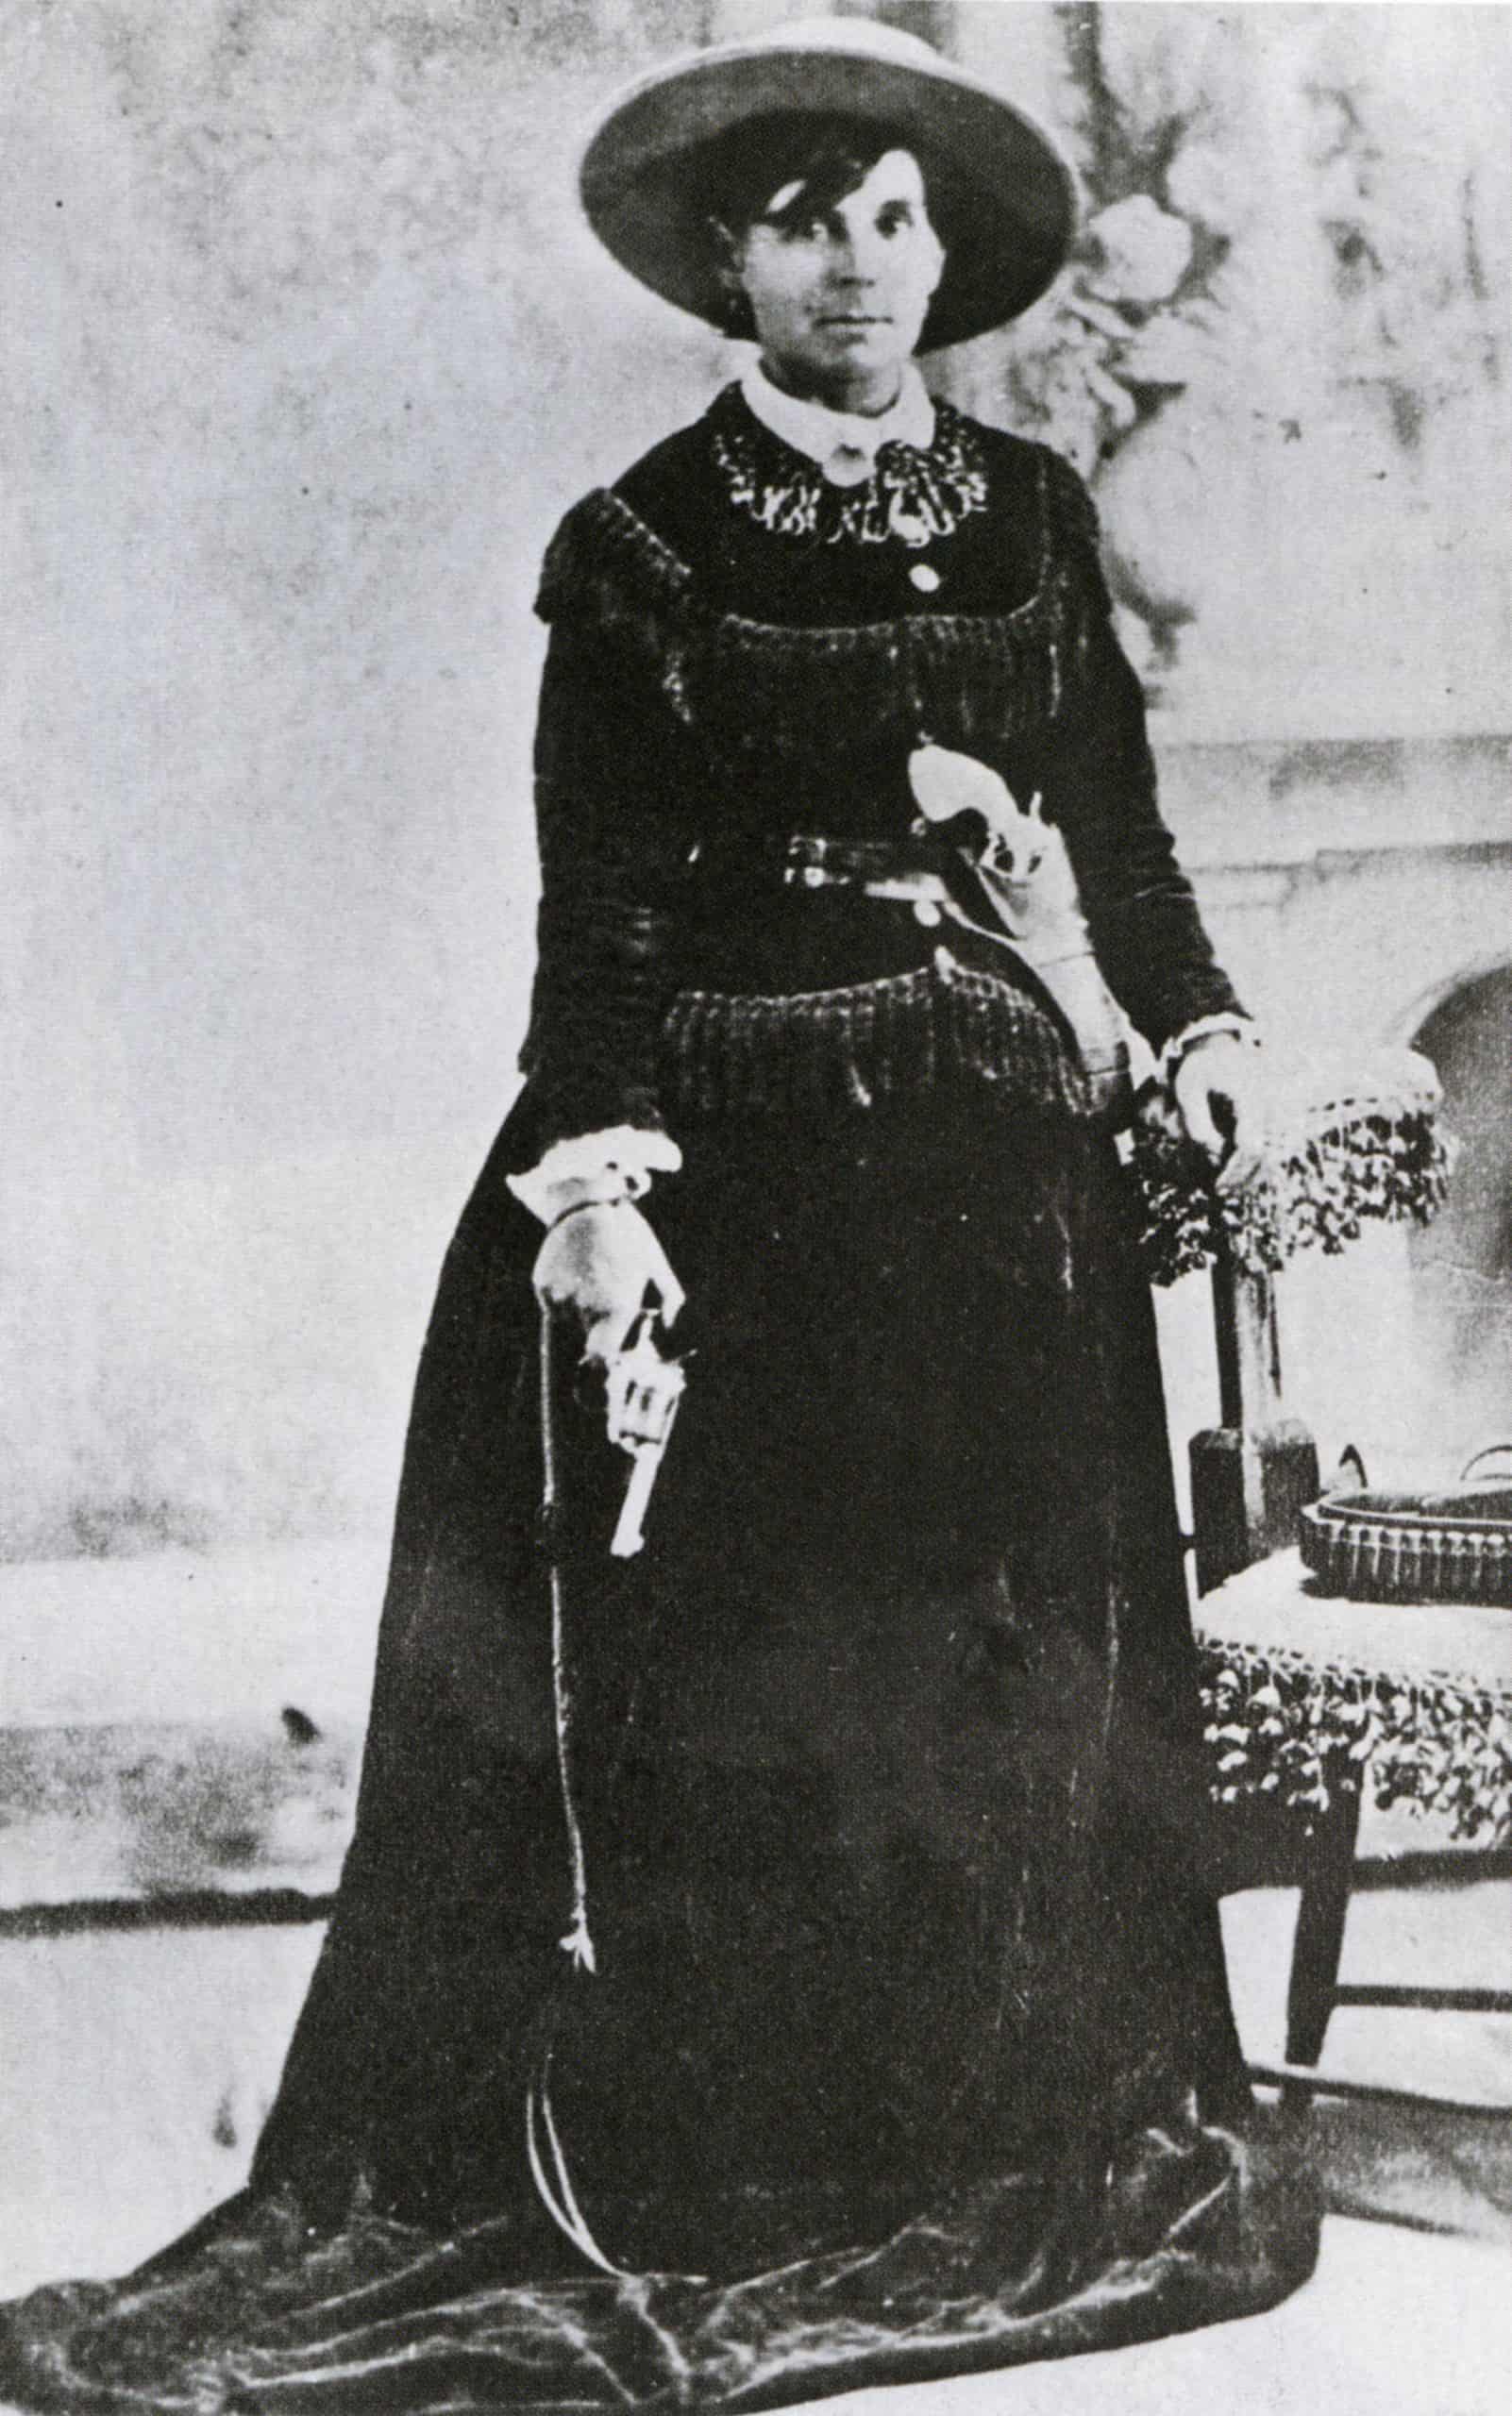 Belle Starr – 1848 to 1889